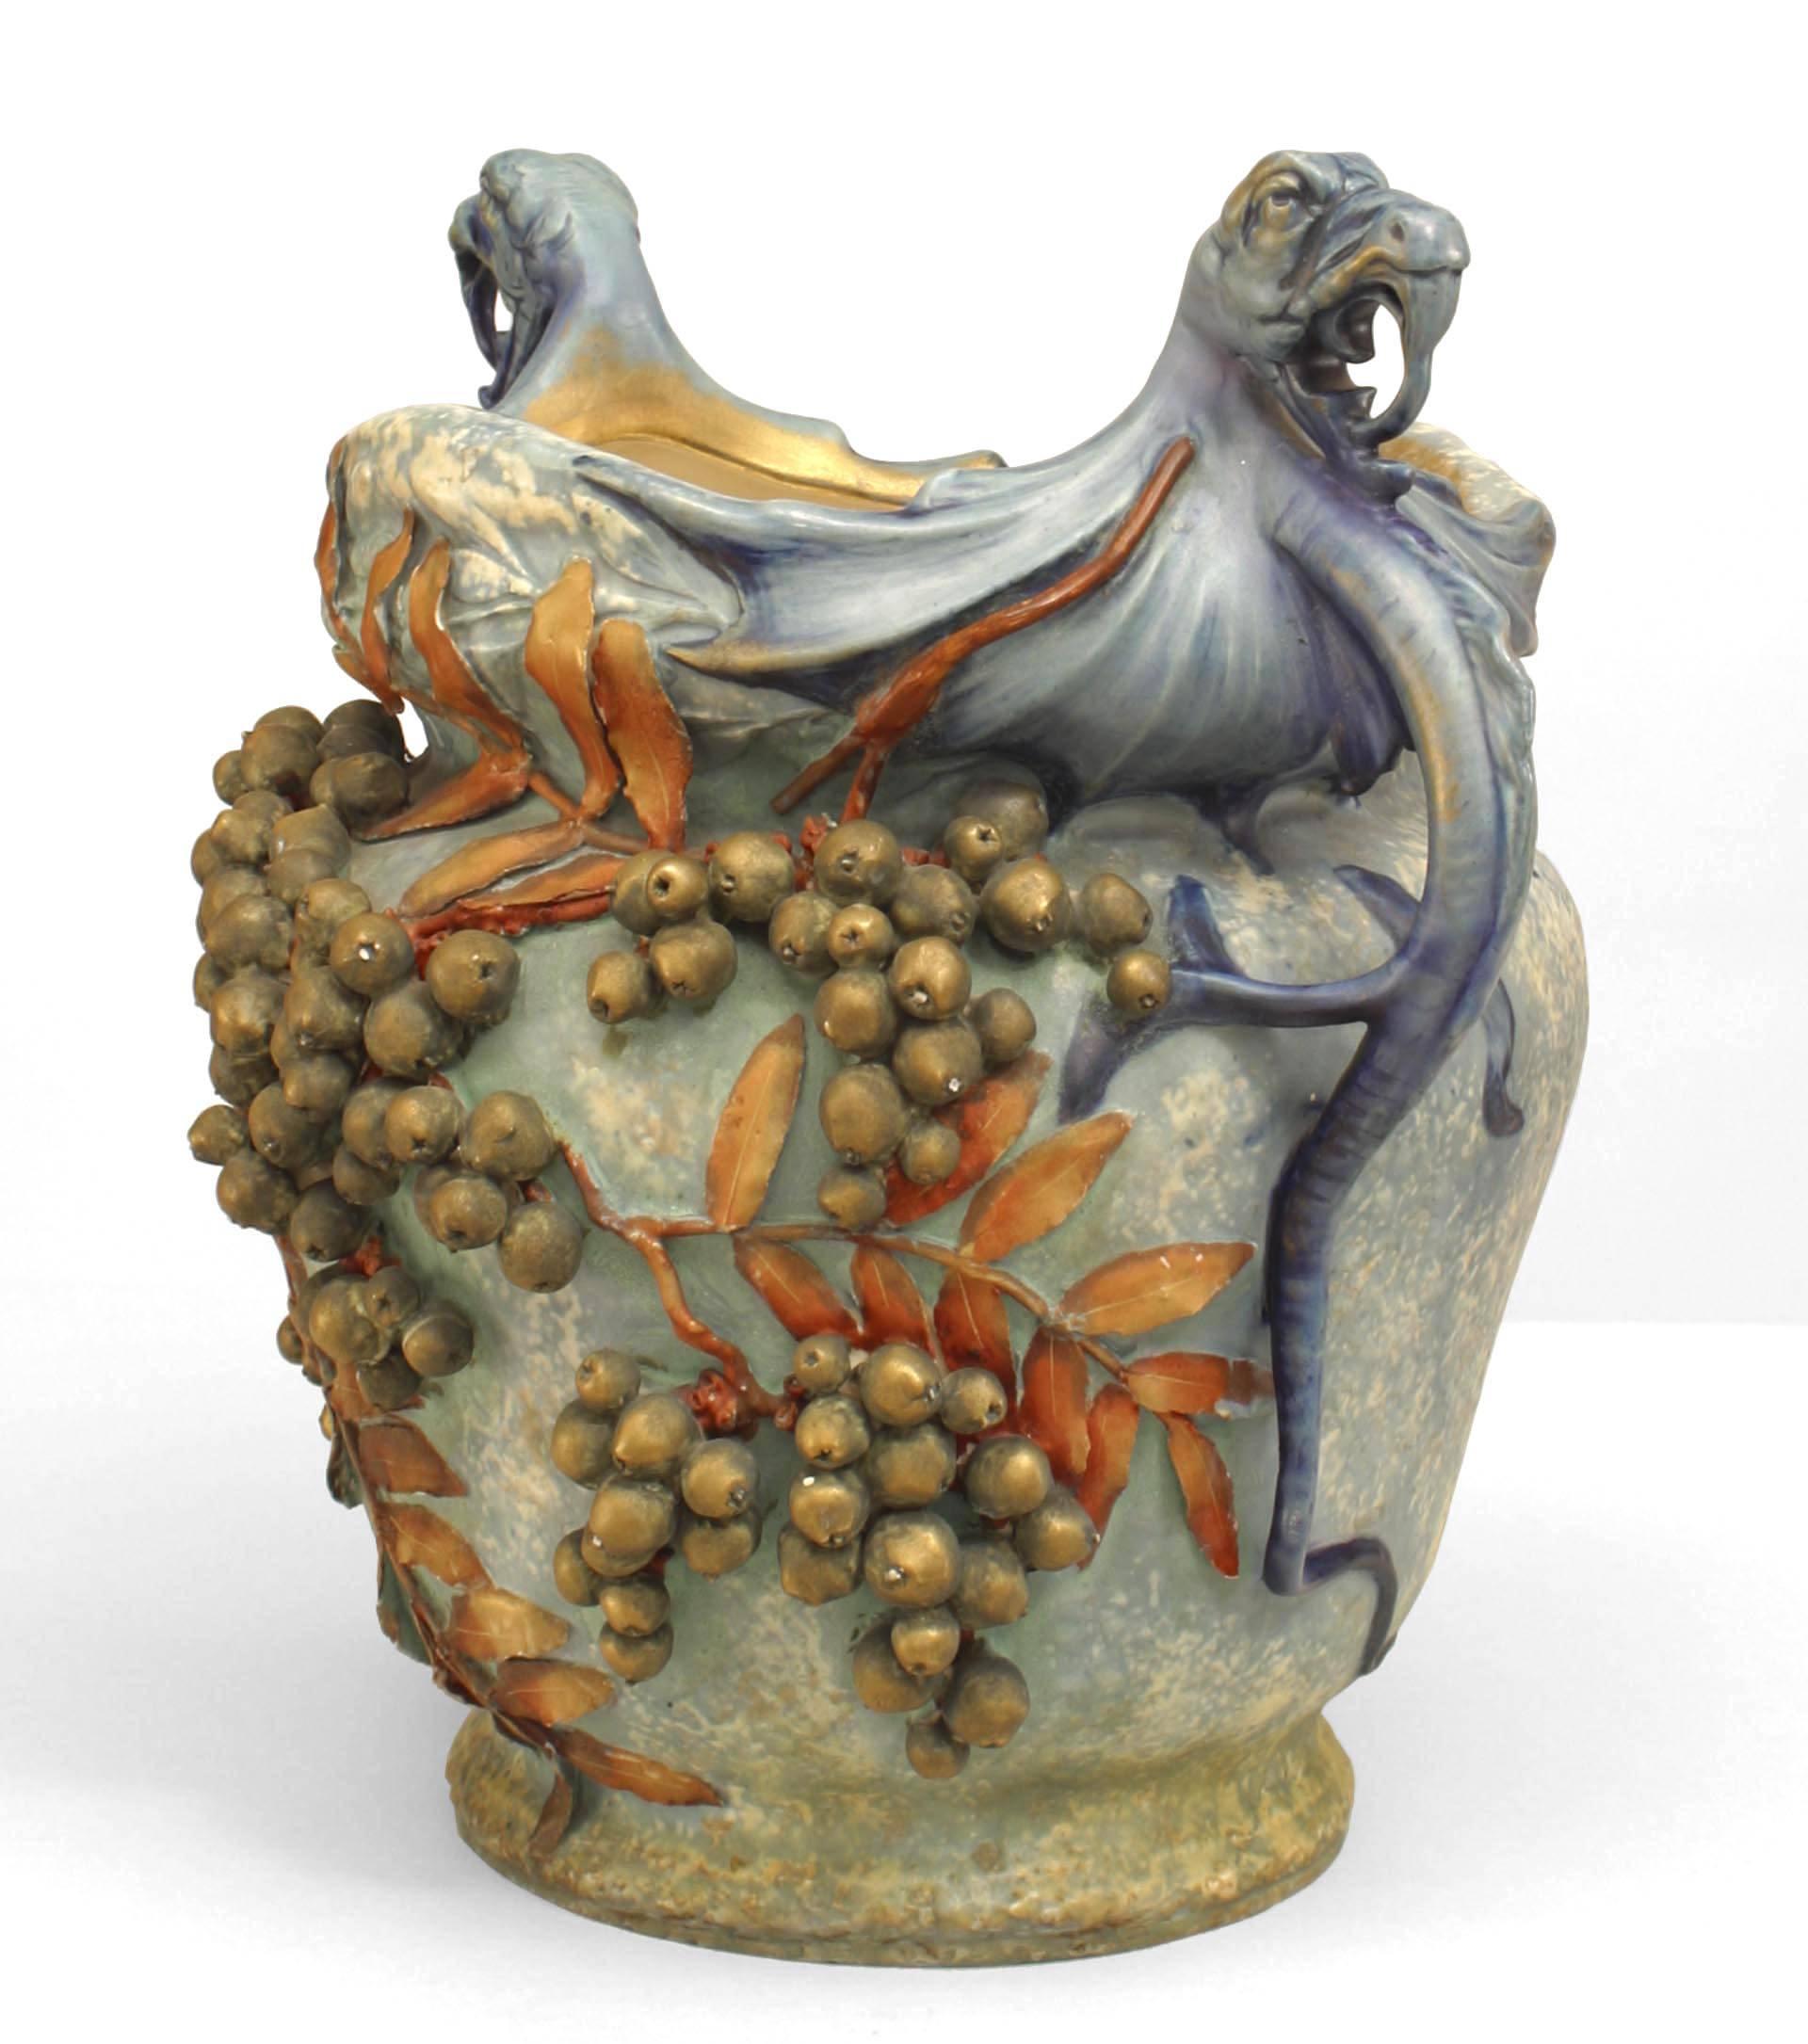 Early 20th century Austrian monumental blue/green Amphora jardiniere with twin cobra handles, decorated with grapes and leave. The work is signed 